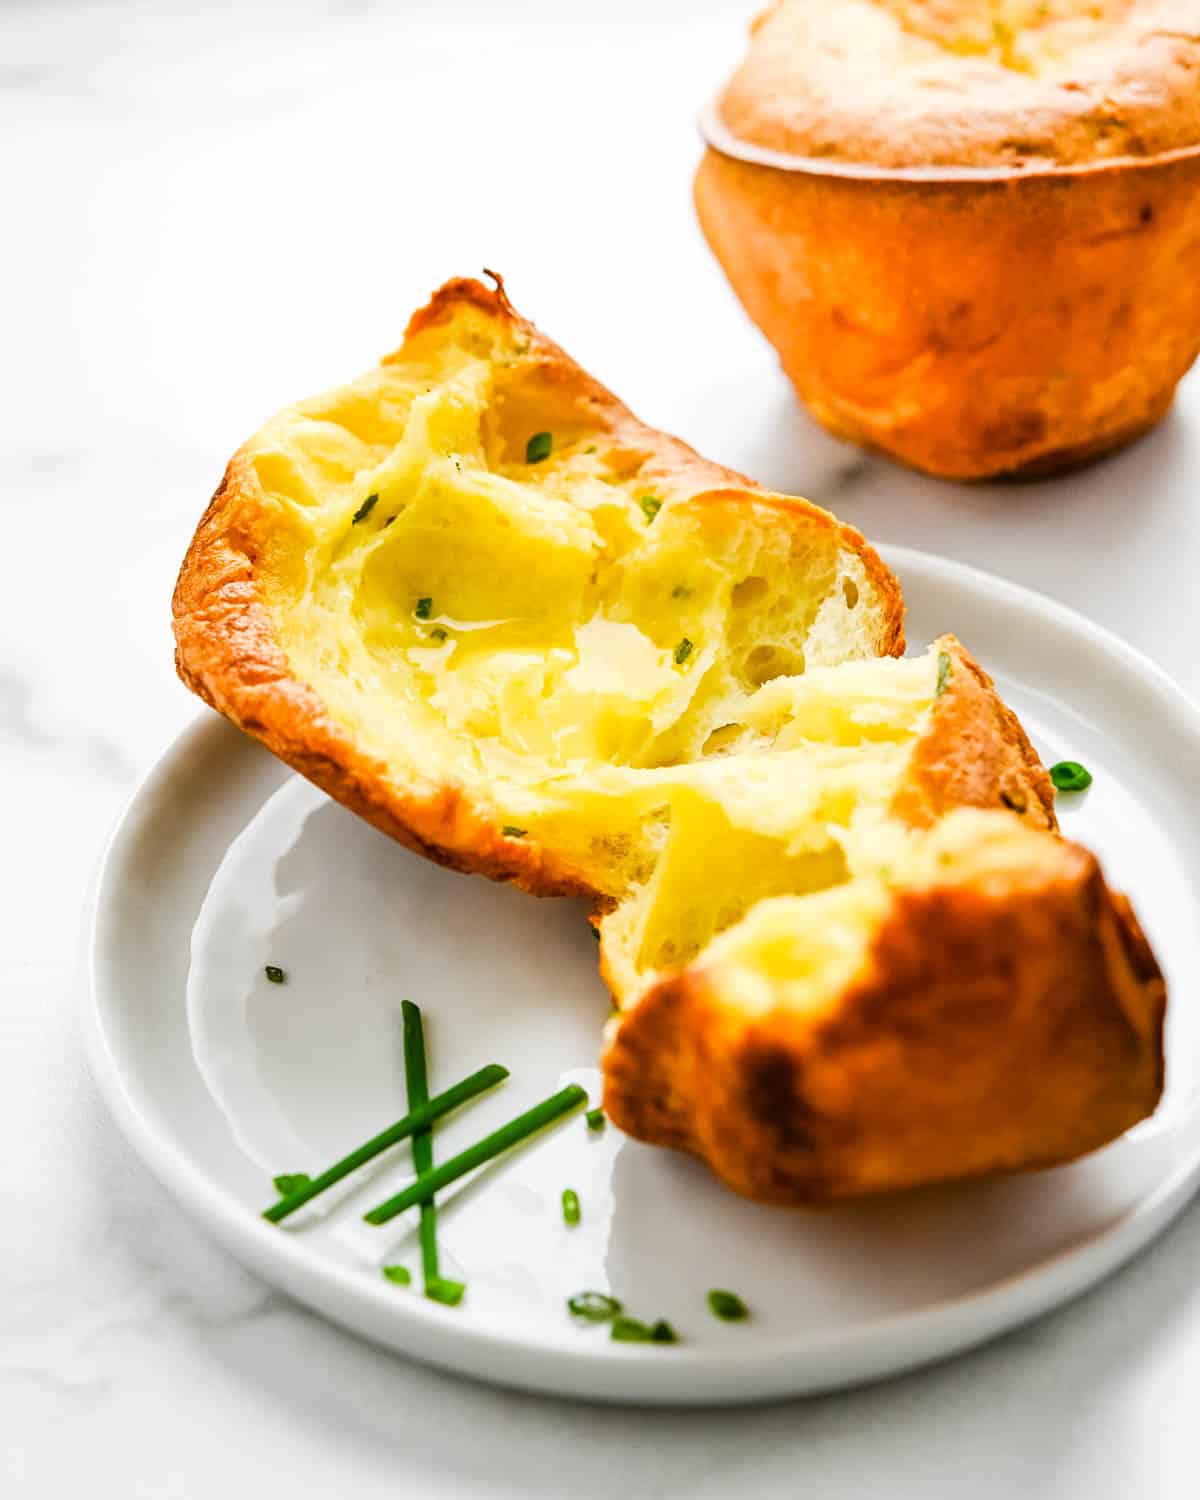 A popover ripped in half to reveal the bright yellow, airy interior.